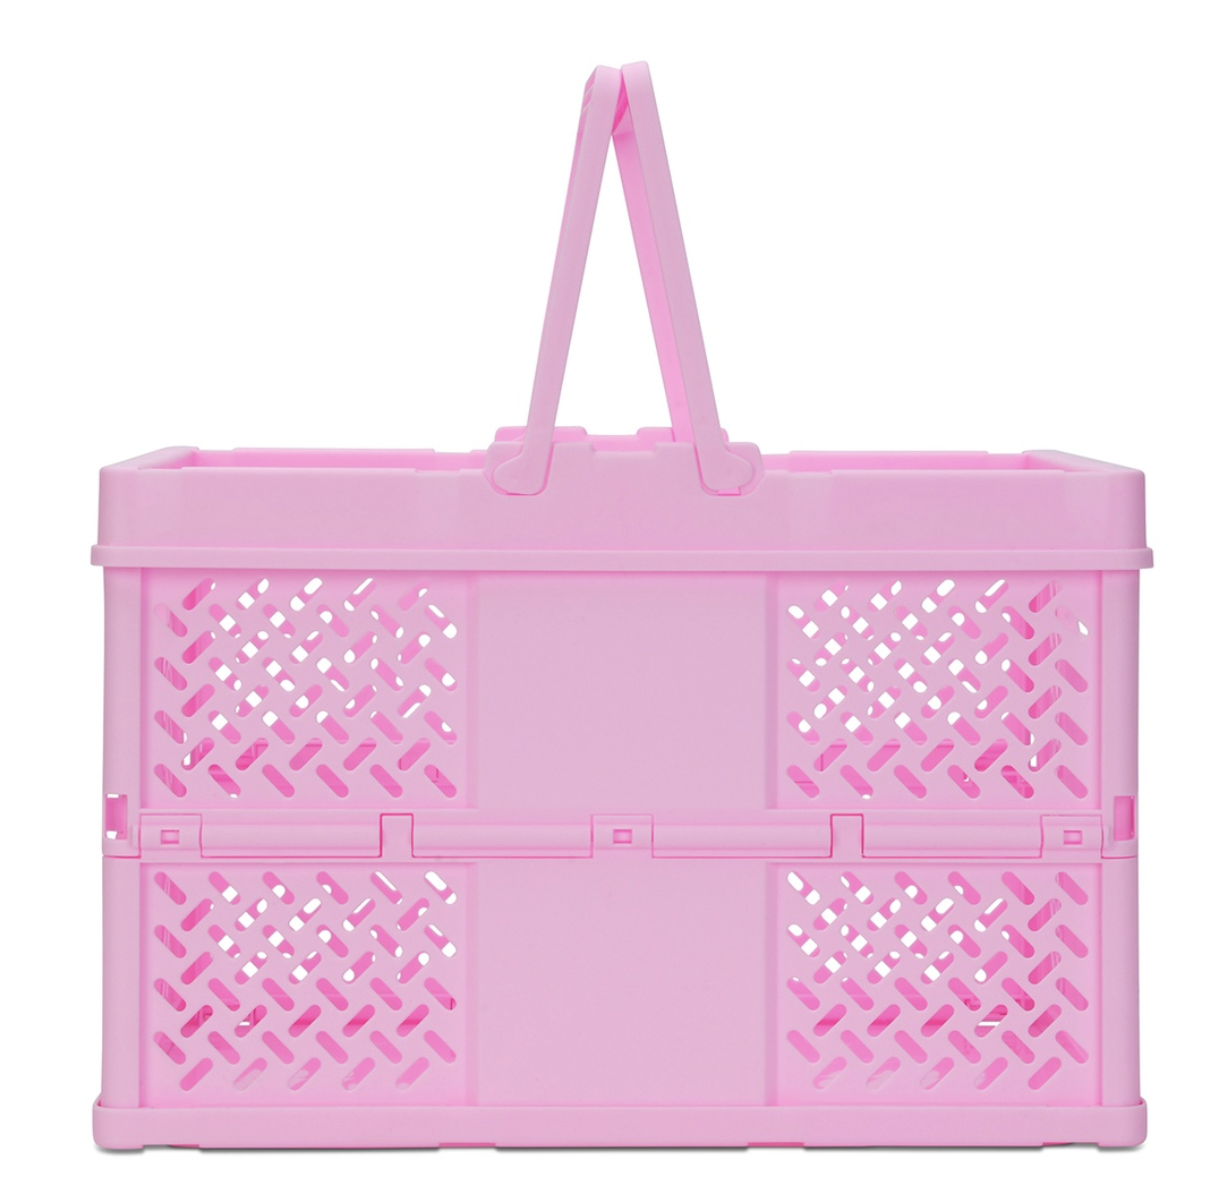 Iscream Large Pink Foldable Storage Crate